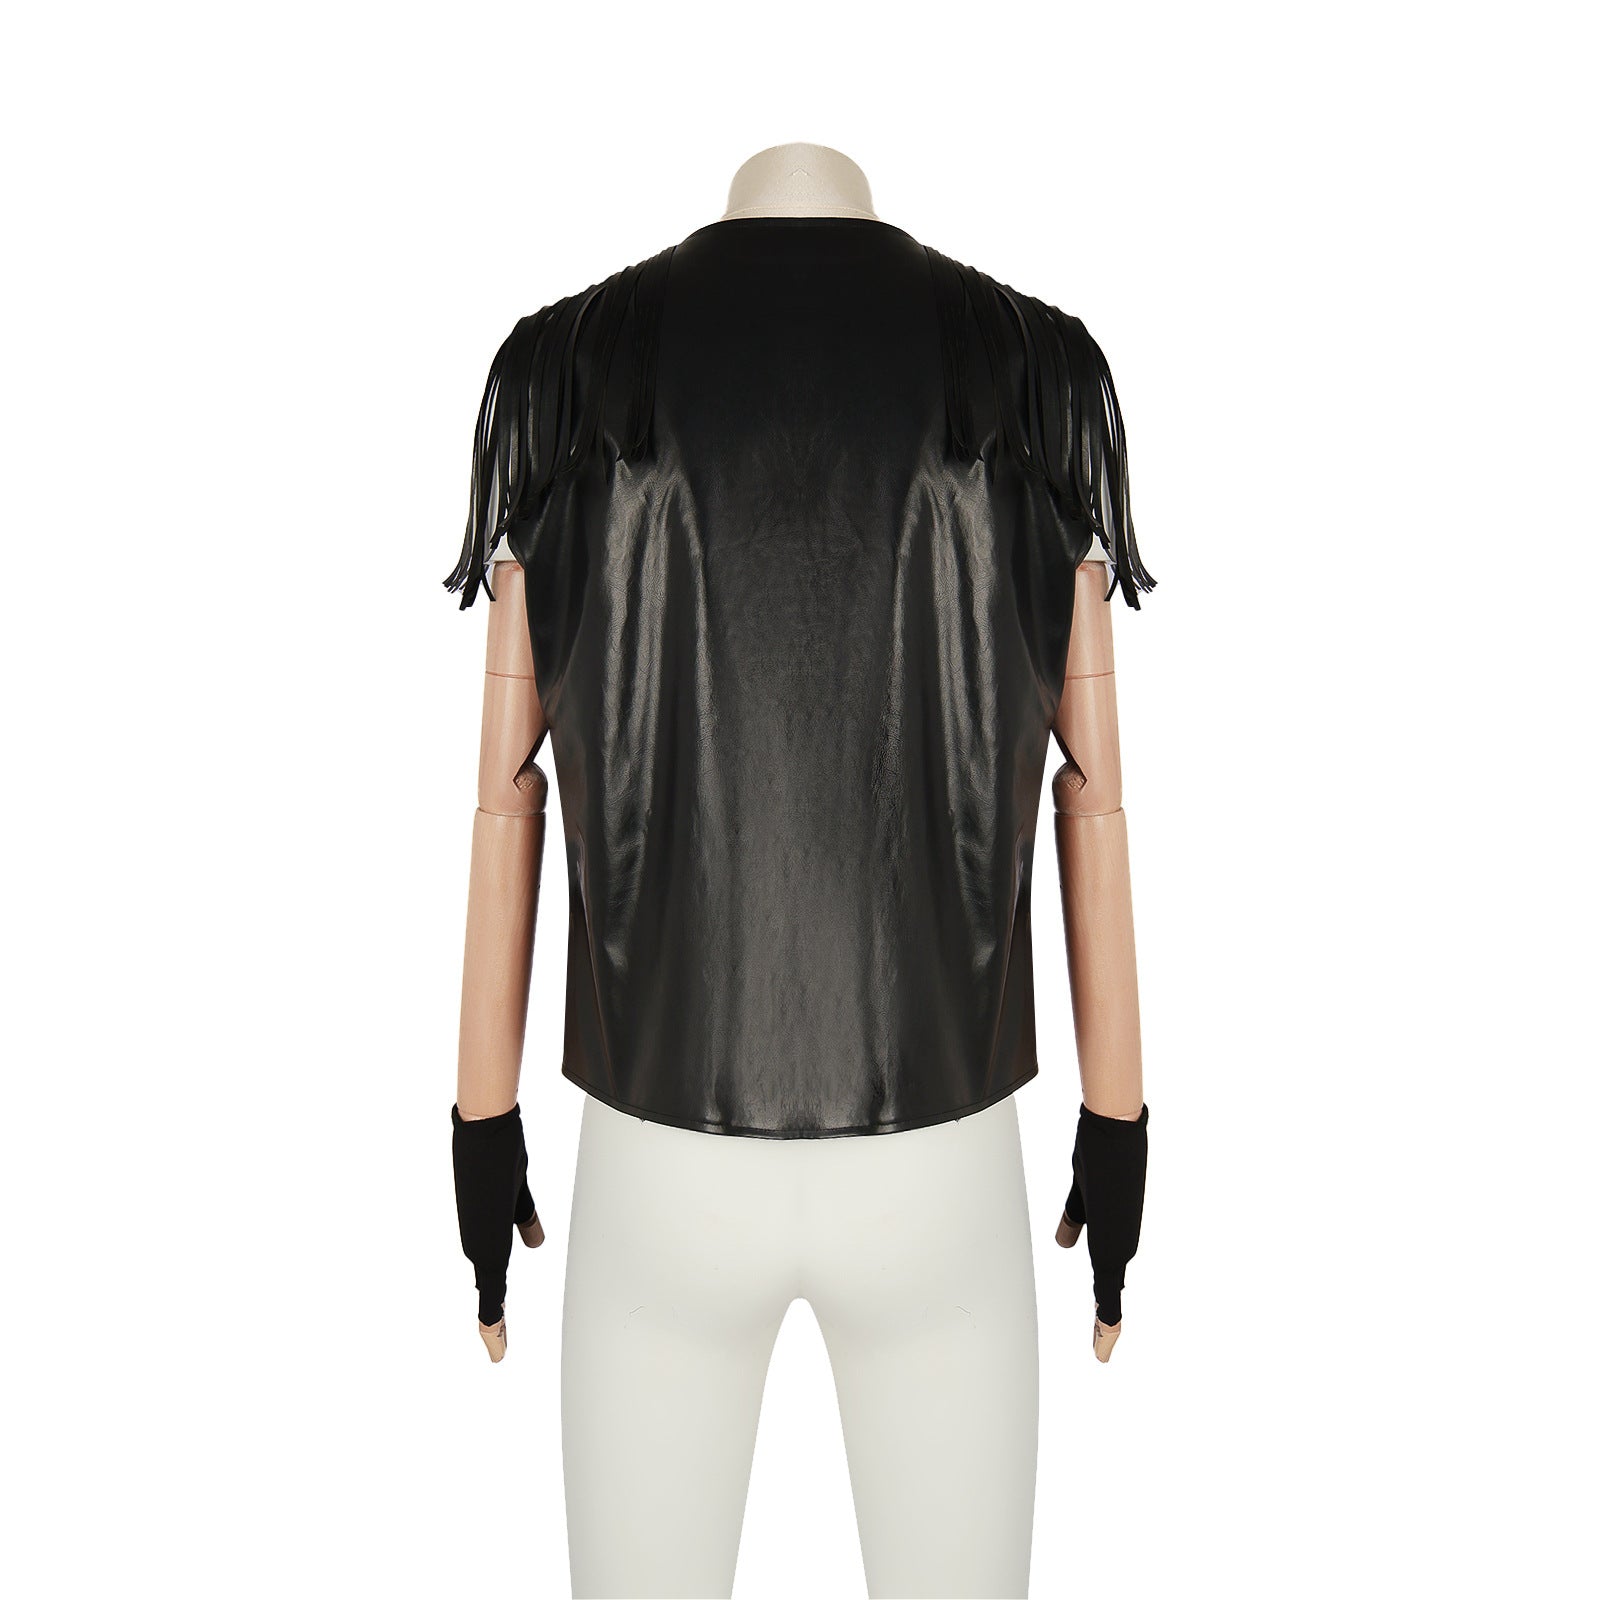 A mannequin from the back wearing a sleeveless black leather top with fringe detailing on the shoulders and black fingerless gloves, embodying a distinct Harajuku style. White pants complete the eclectic outfit with a European Retro Vest For Men from Maramalive™.